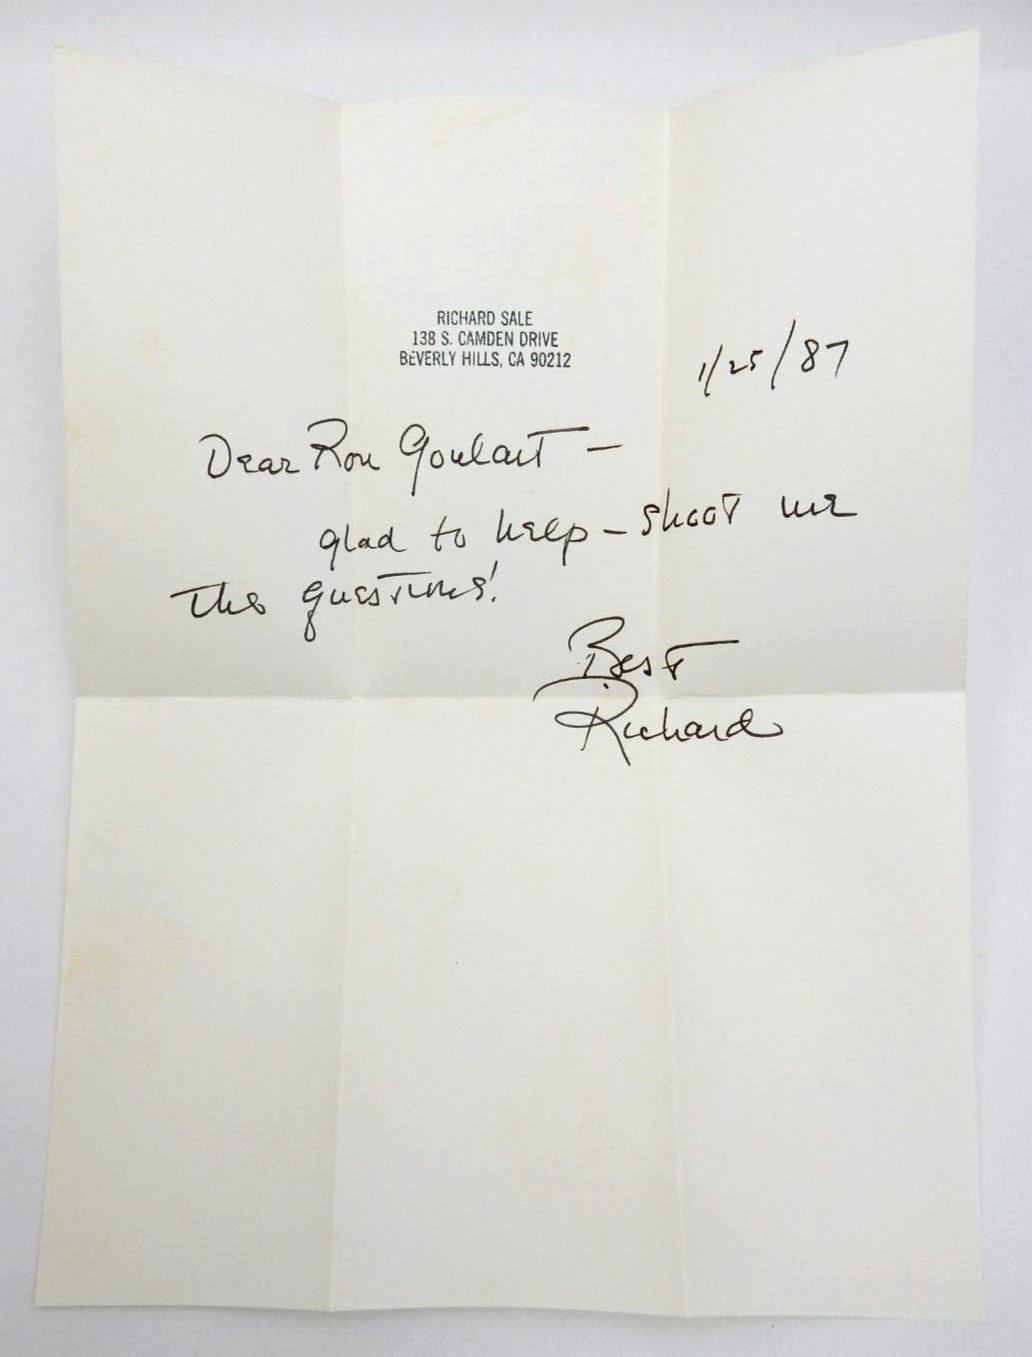 RICHARD SALE AUTHOR SIGNED LETTER TO HISTORIAN RON GOULART 1987 (WITH LOA)